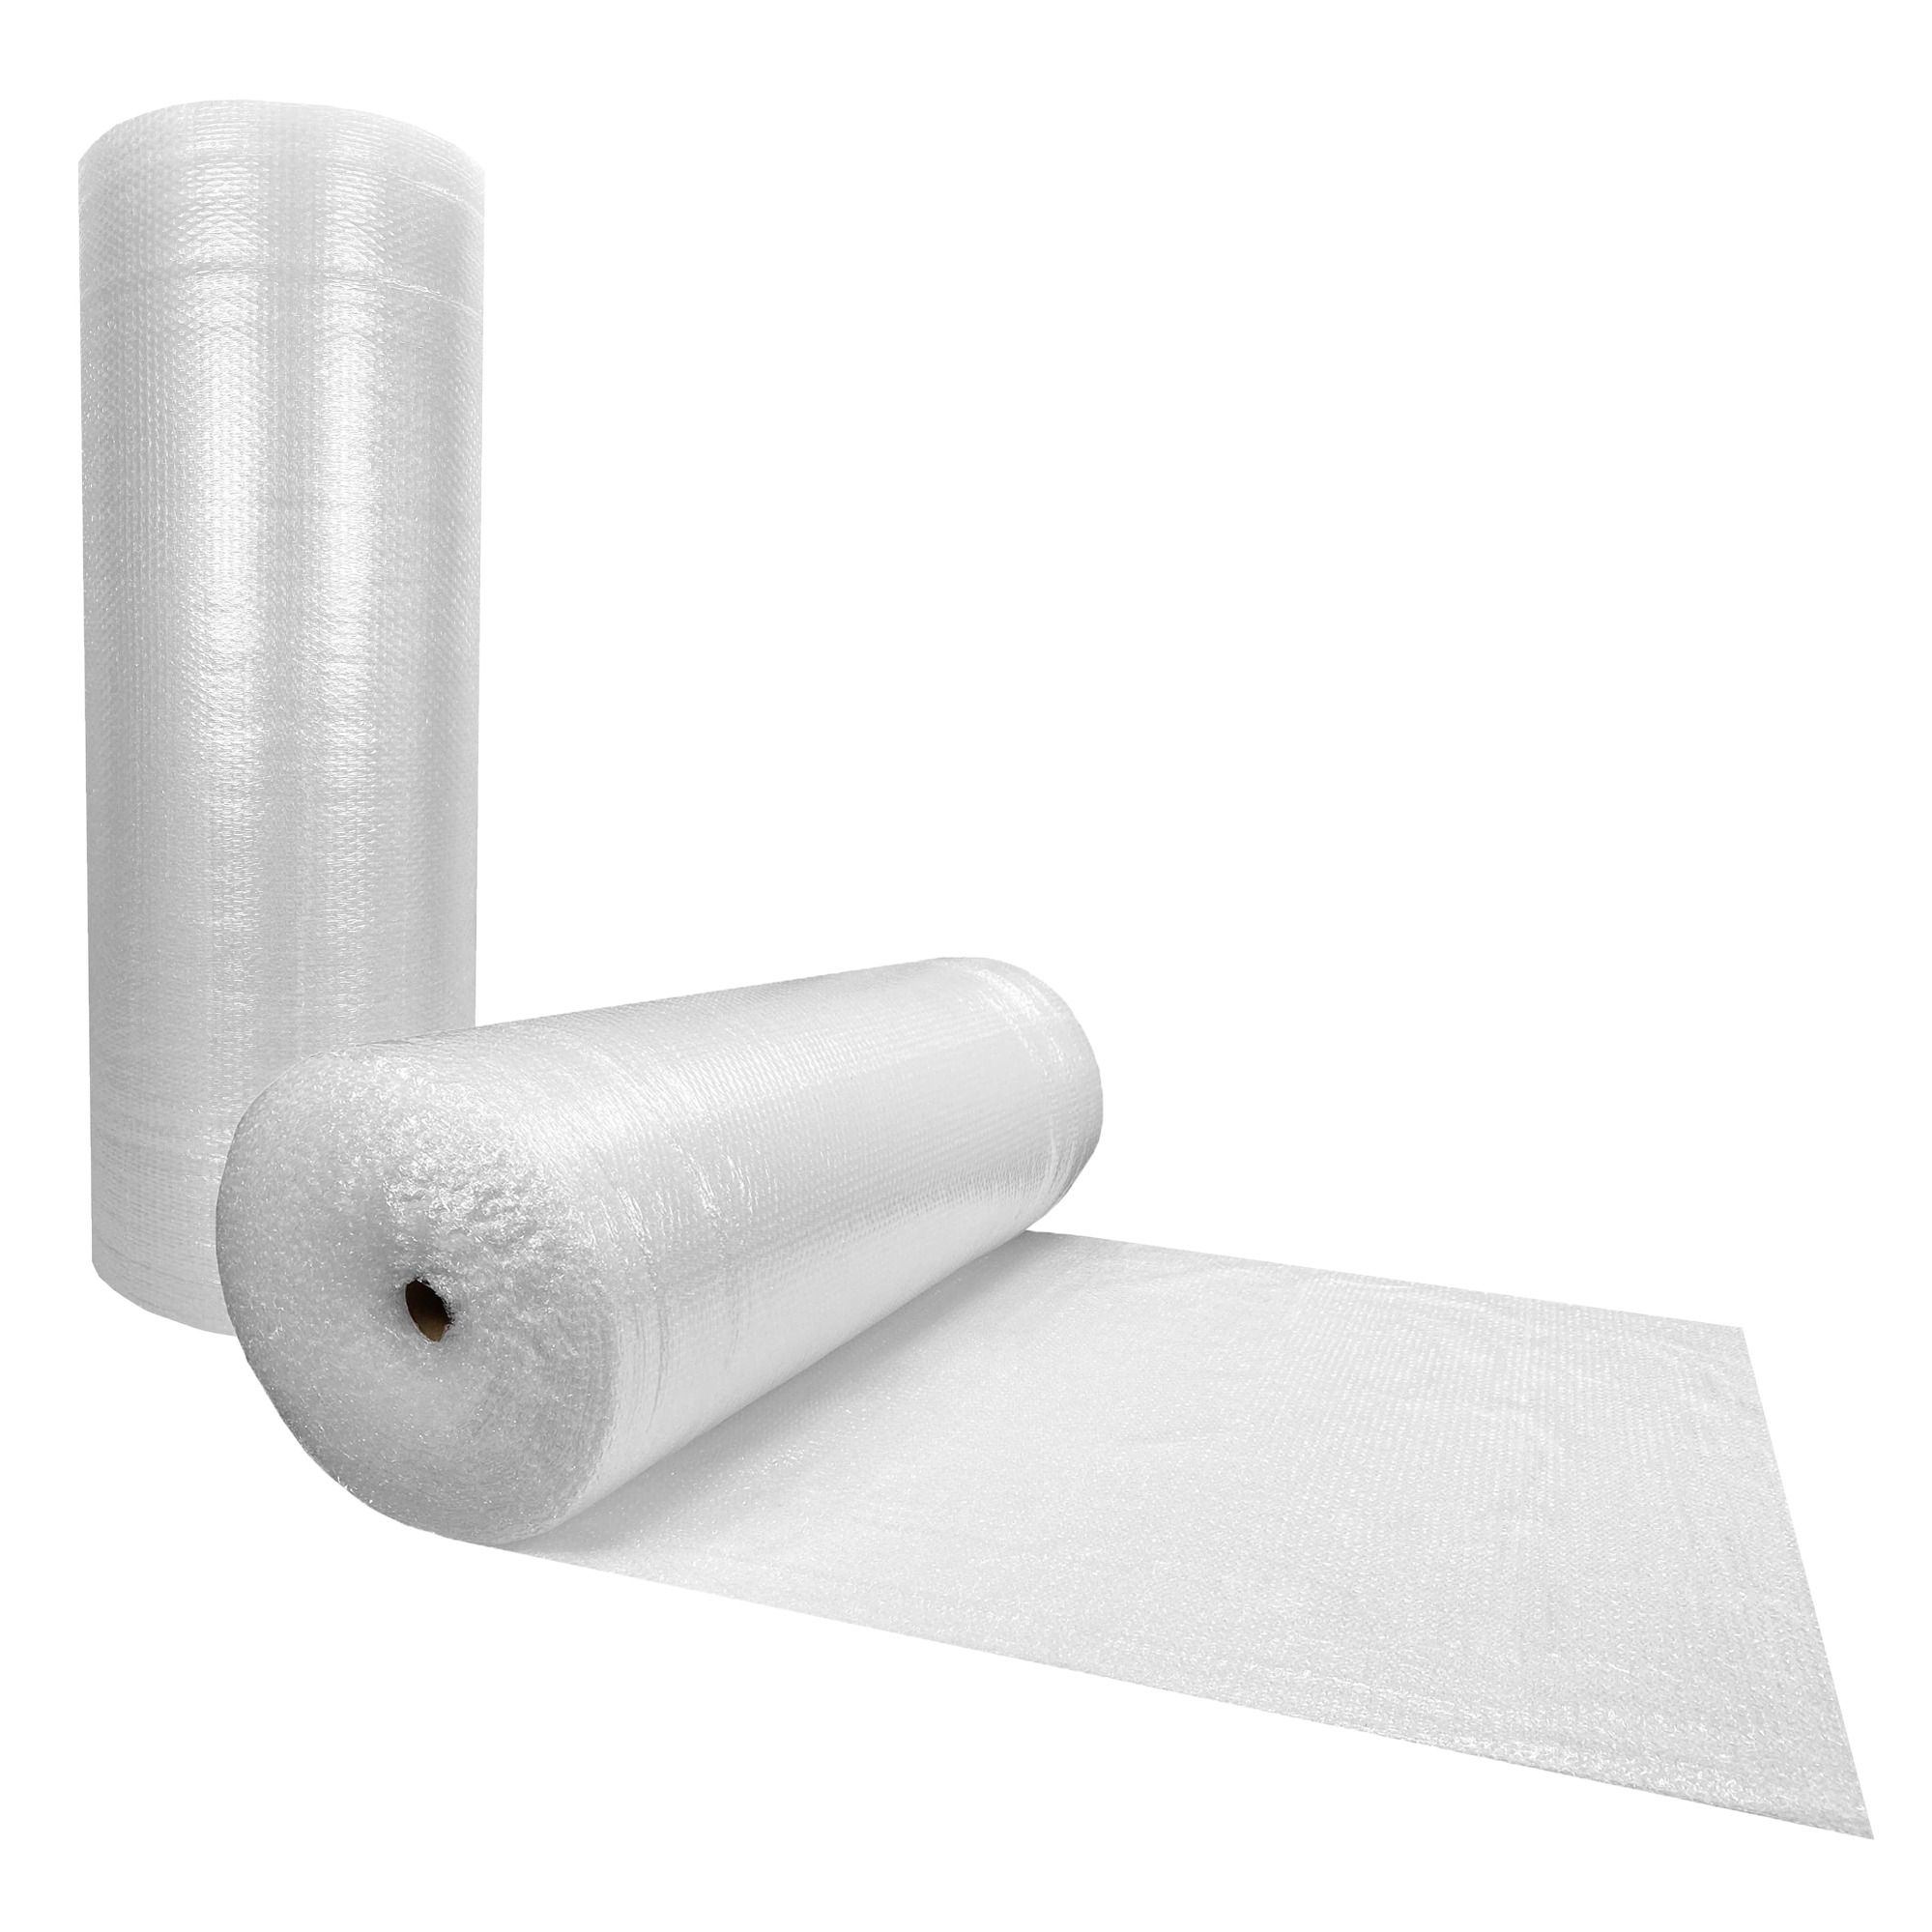 Applications of Bubble Wrap Packaging Films